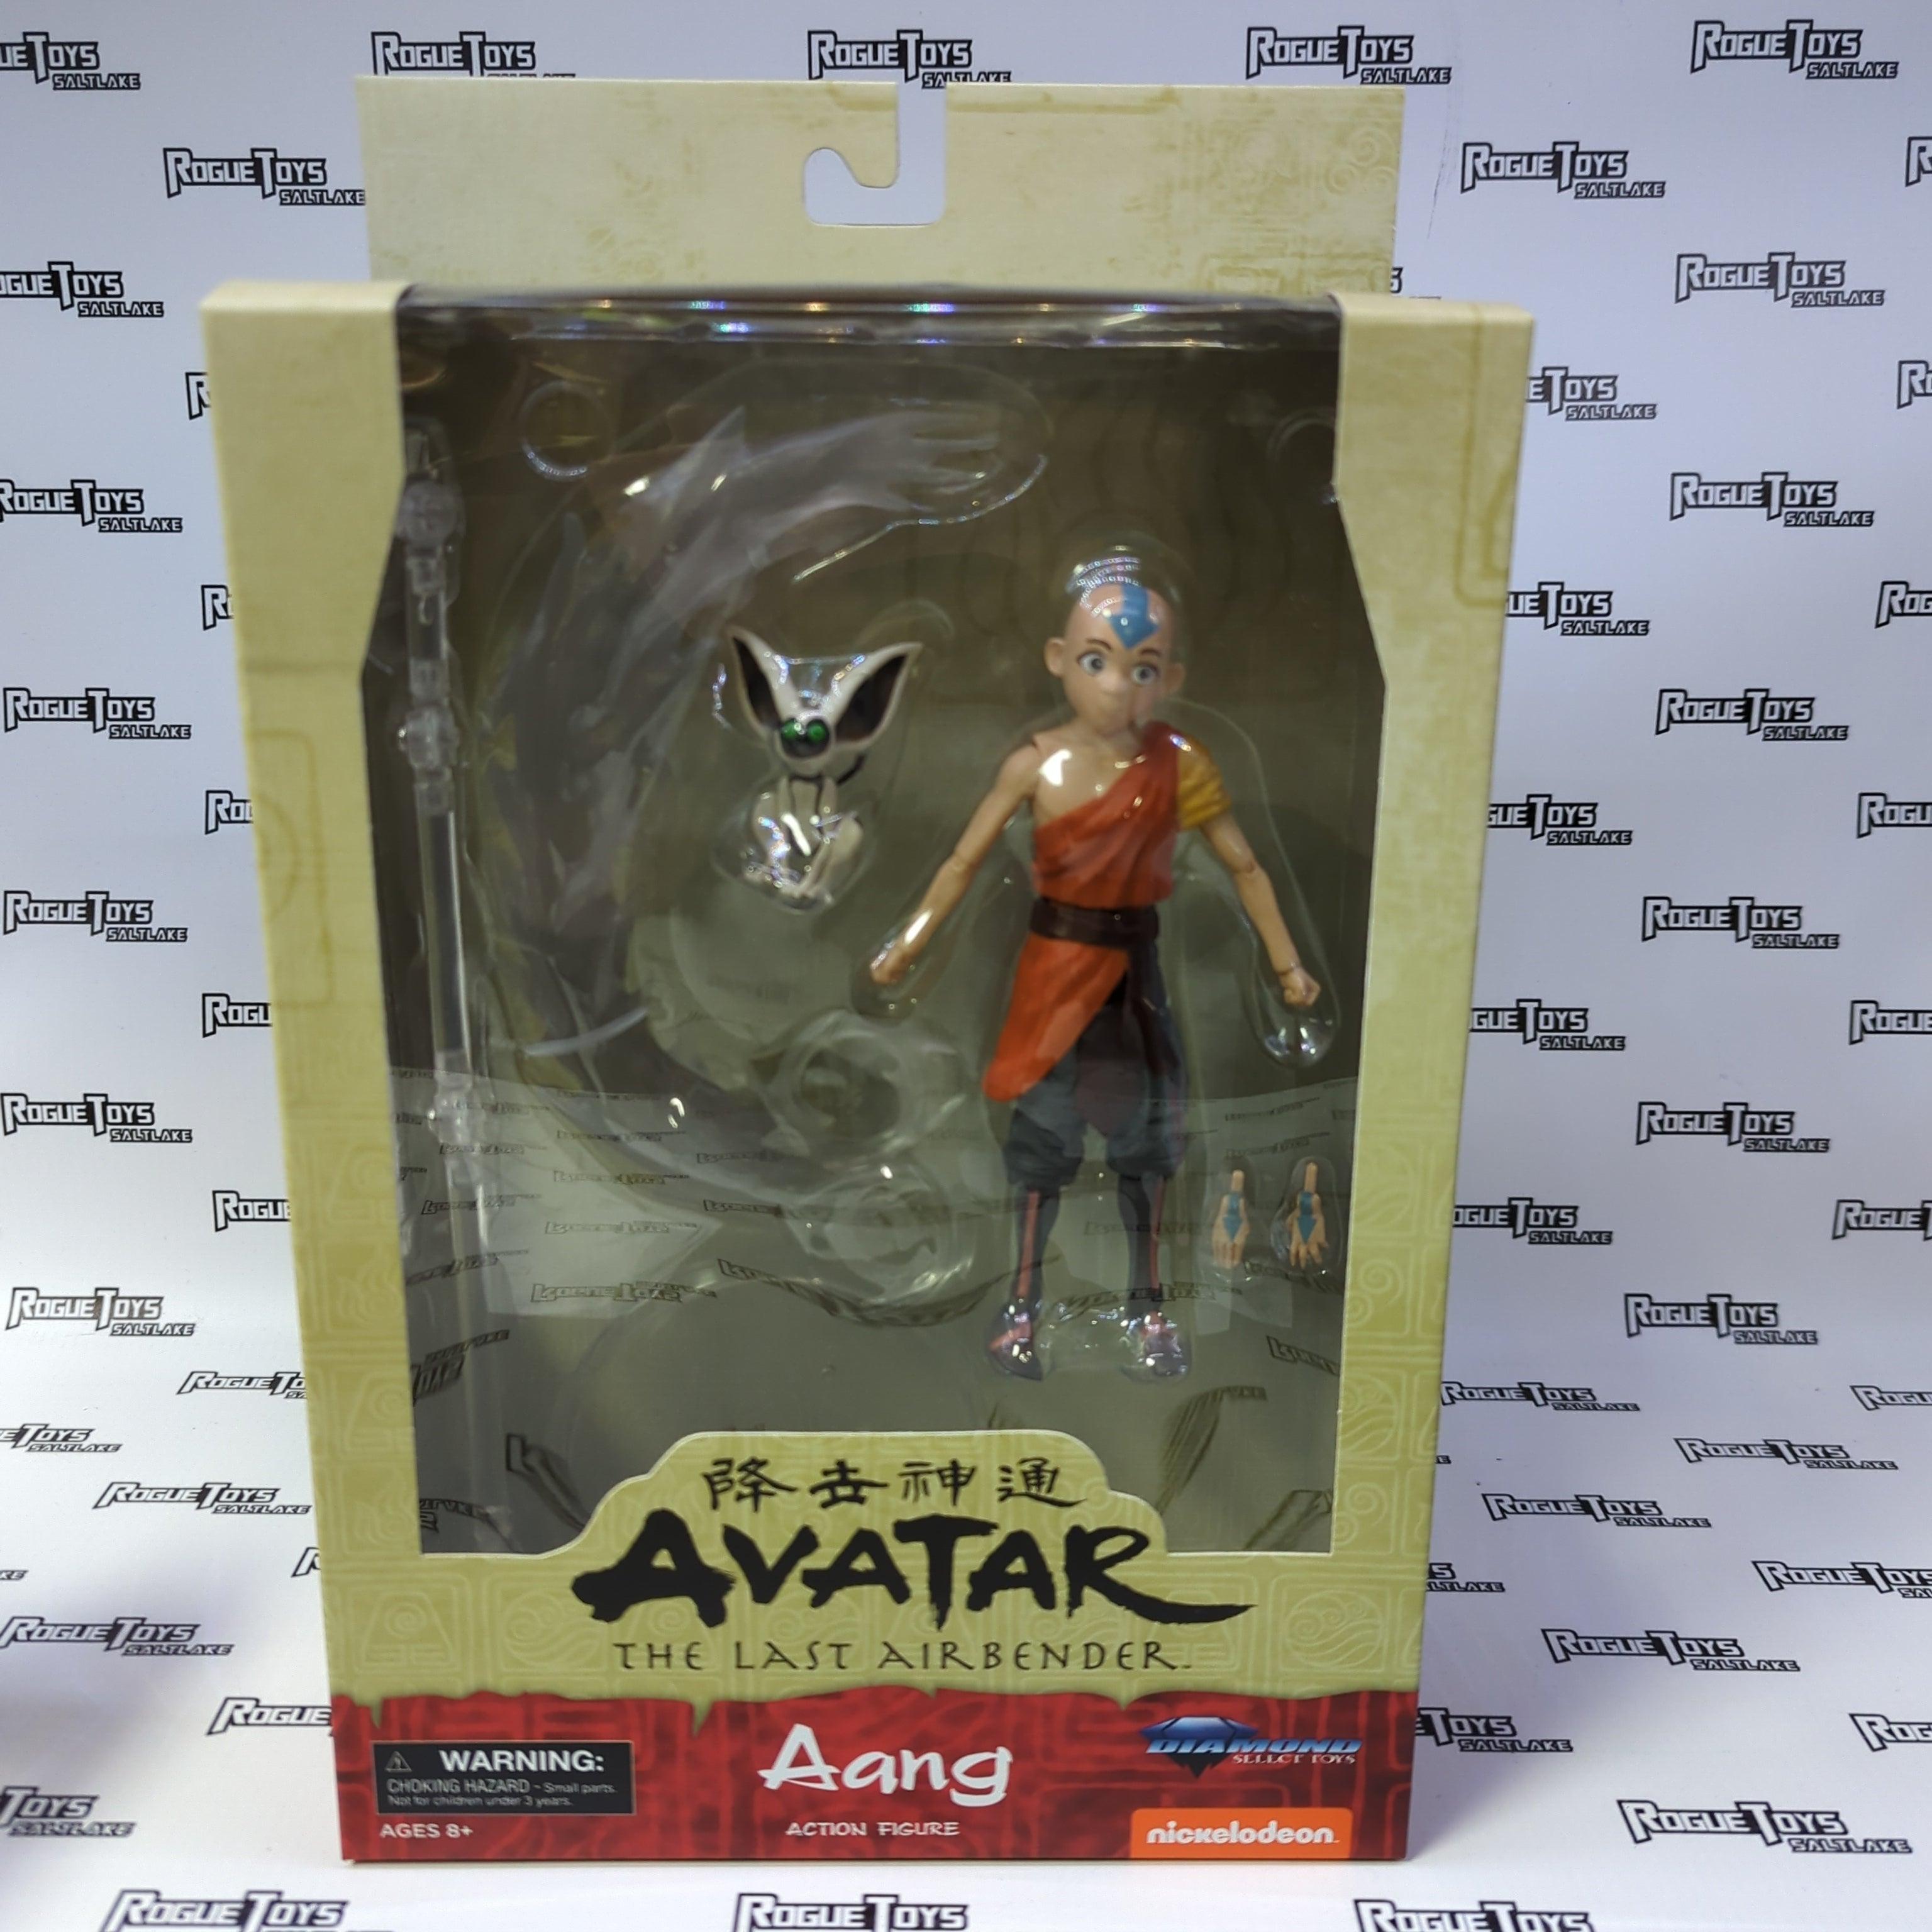 Diamond Select Toys Avatar The Last Airbender Aang Action Figure - Rogue Toys